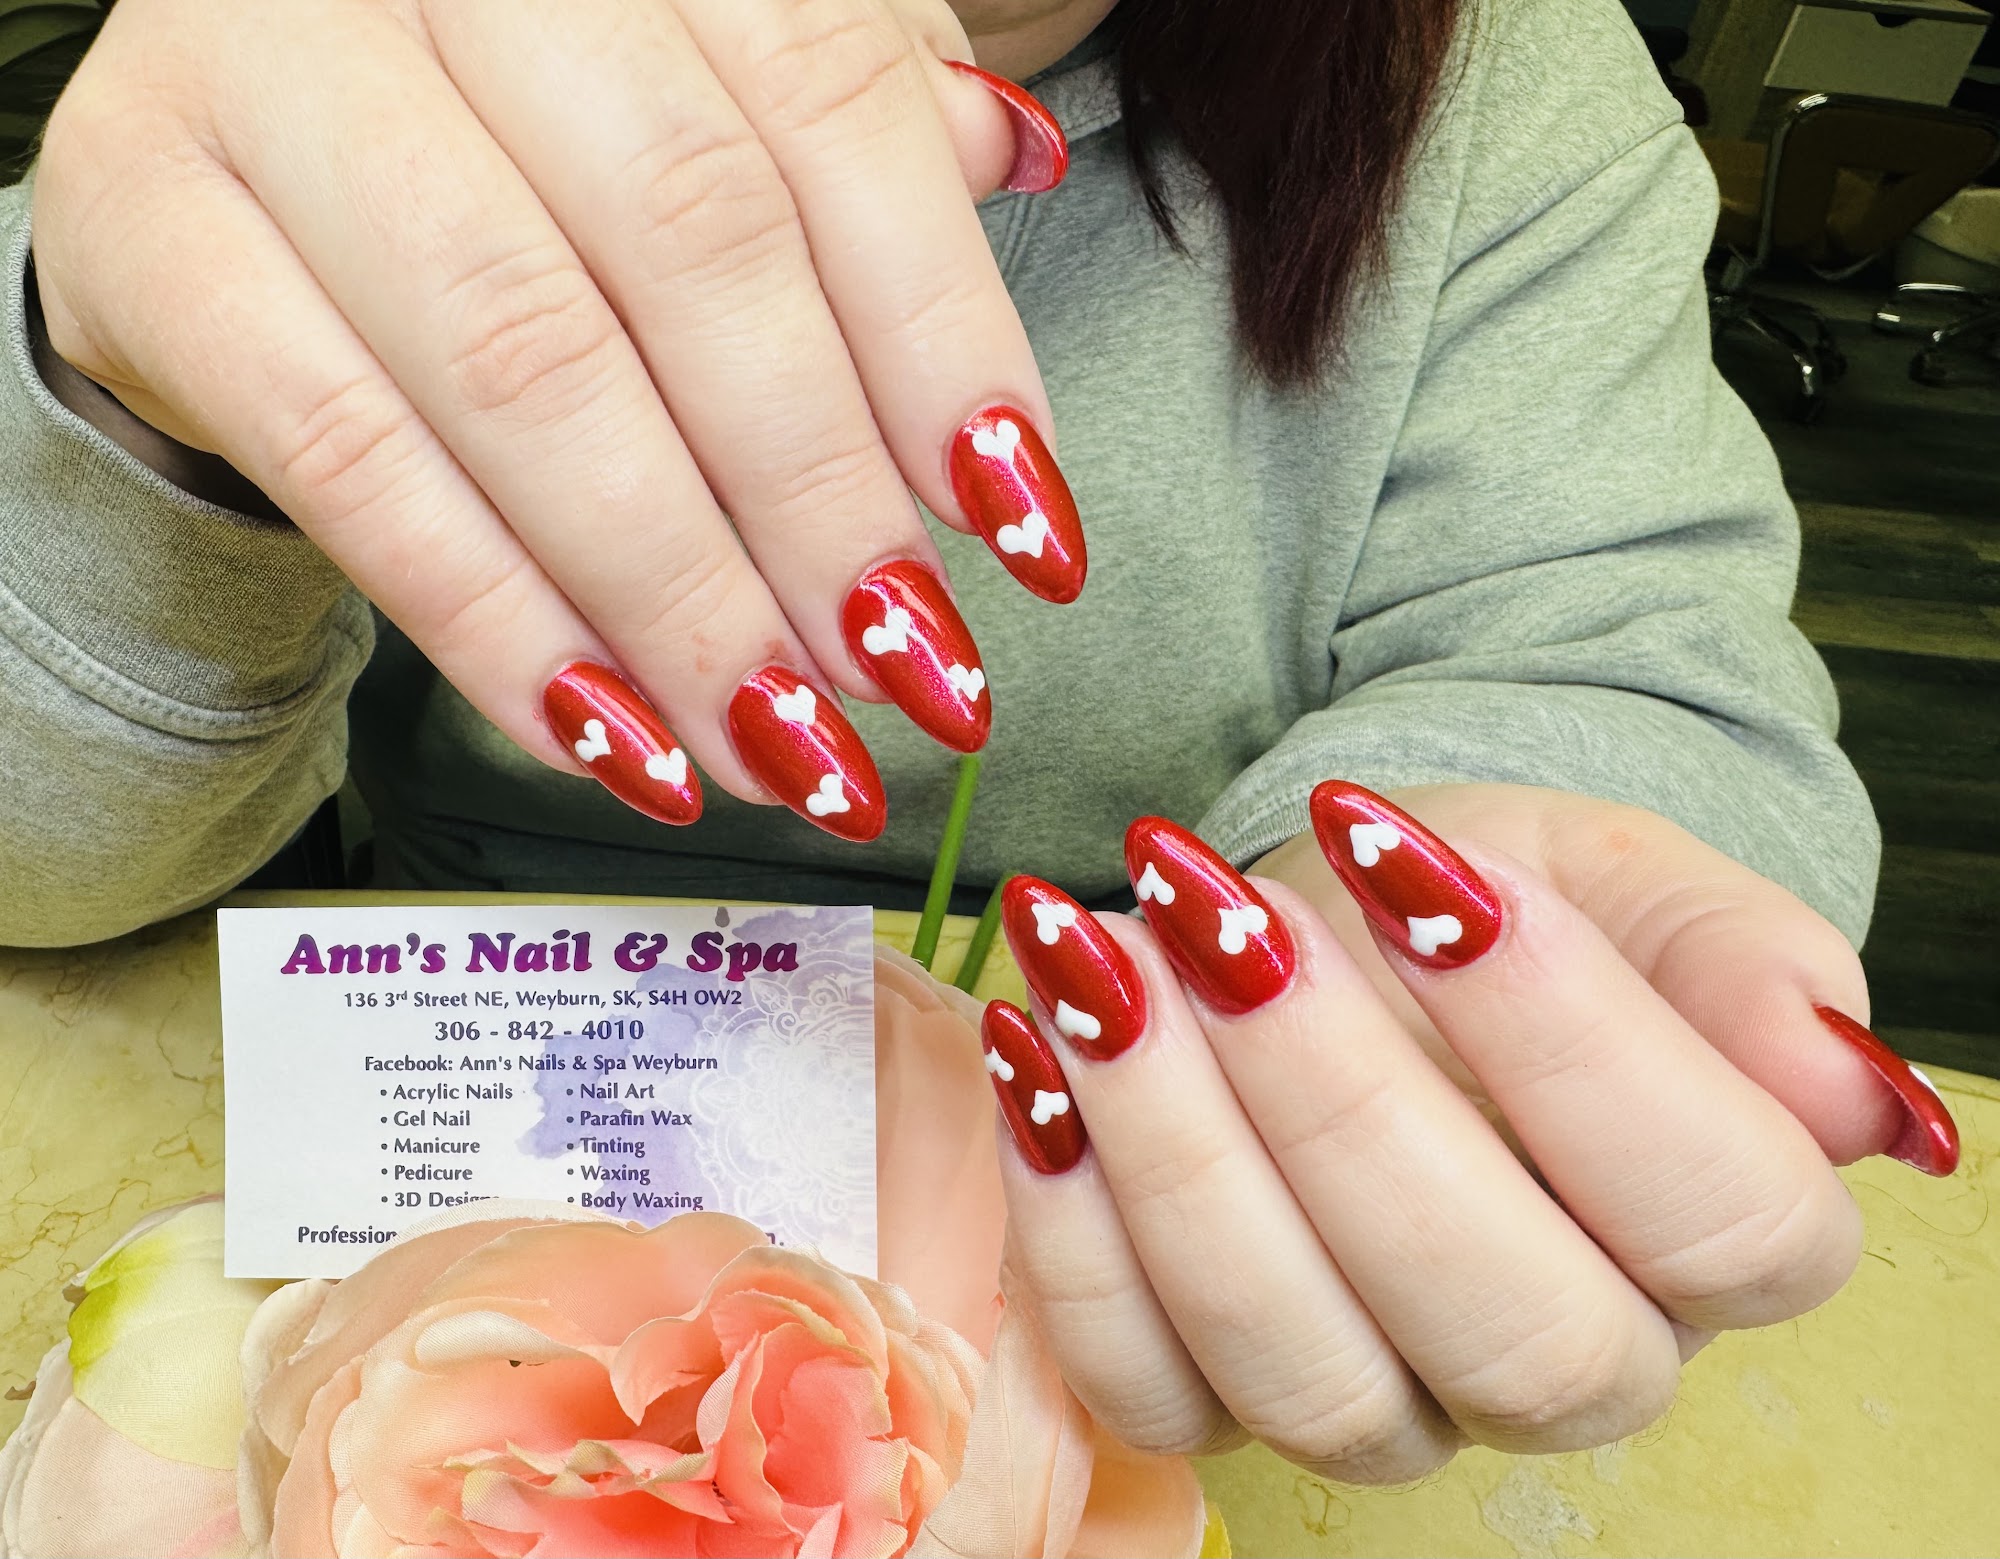 Ann's Nails and Spa